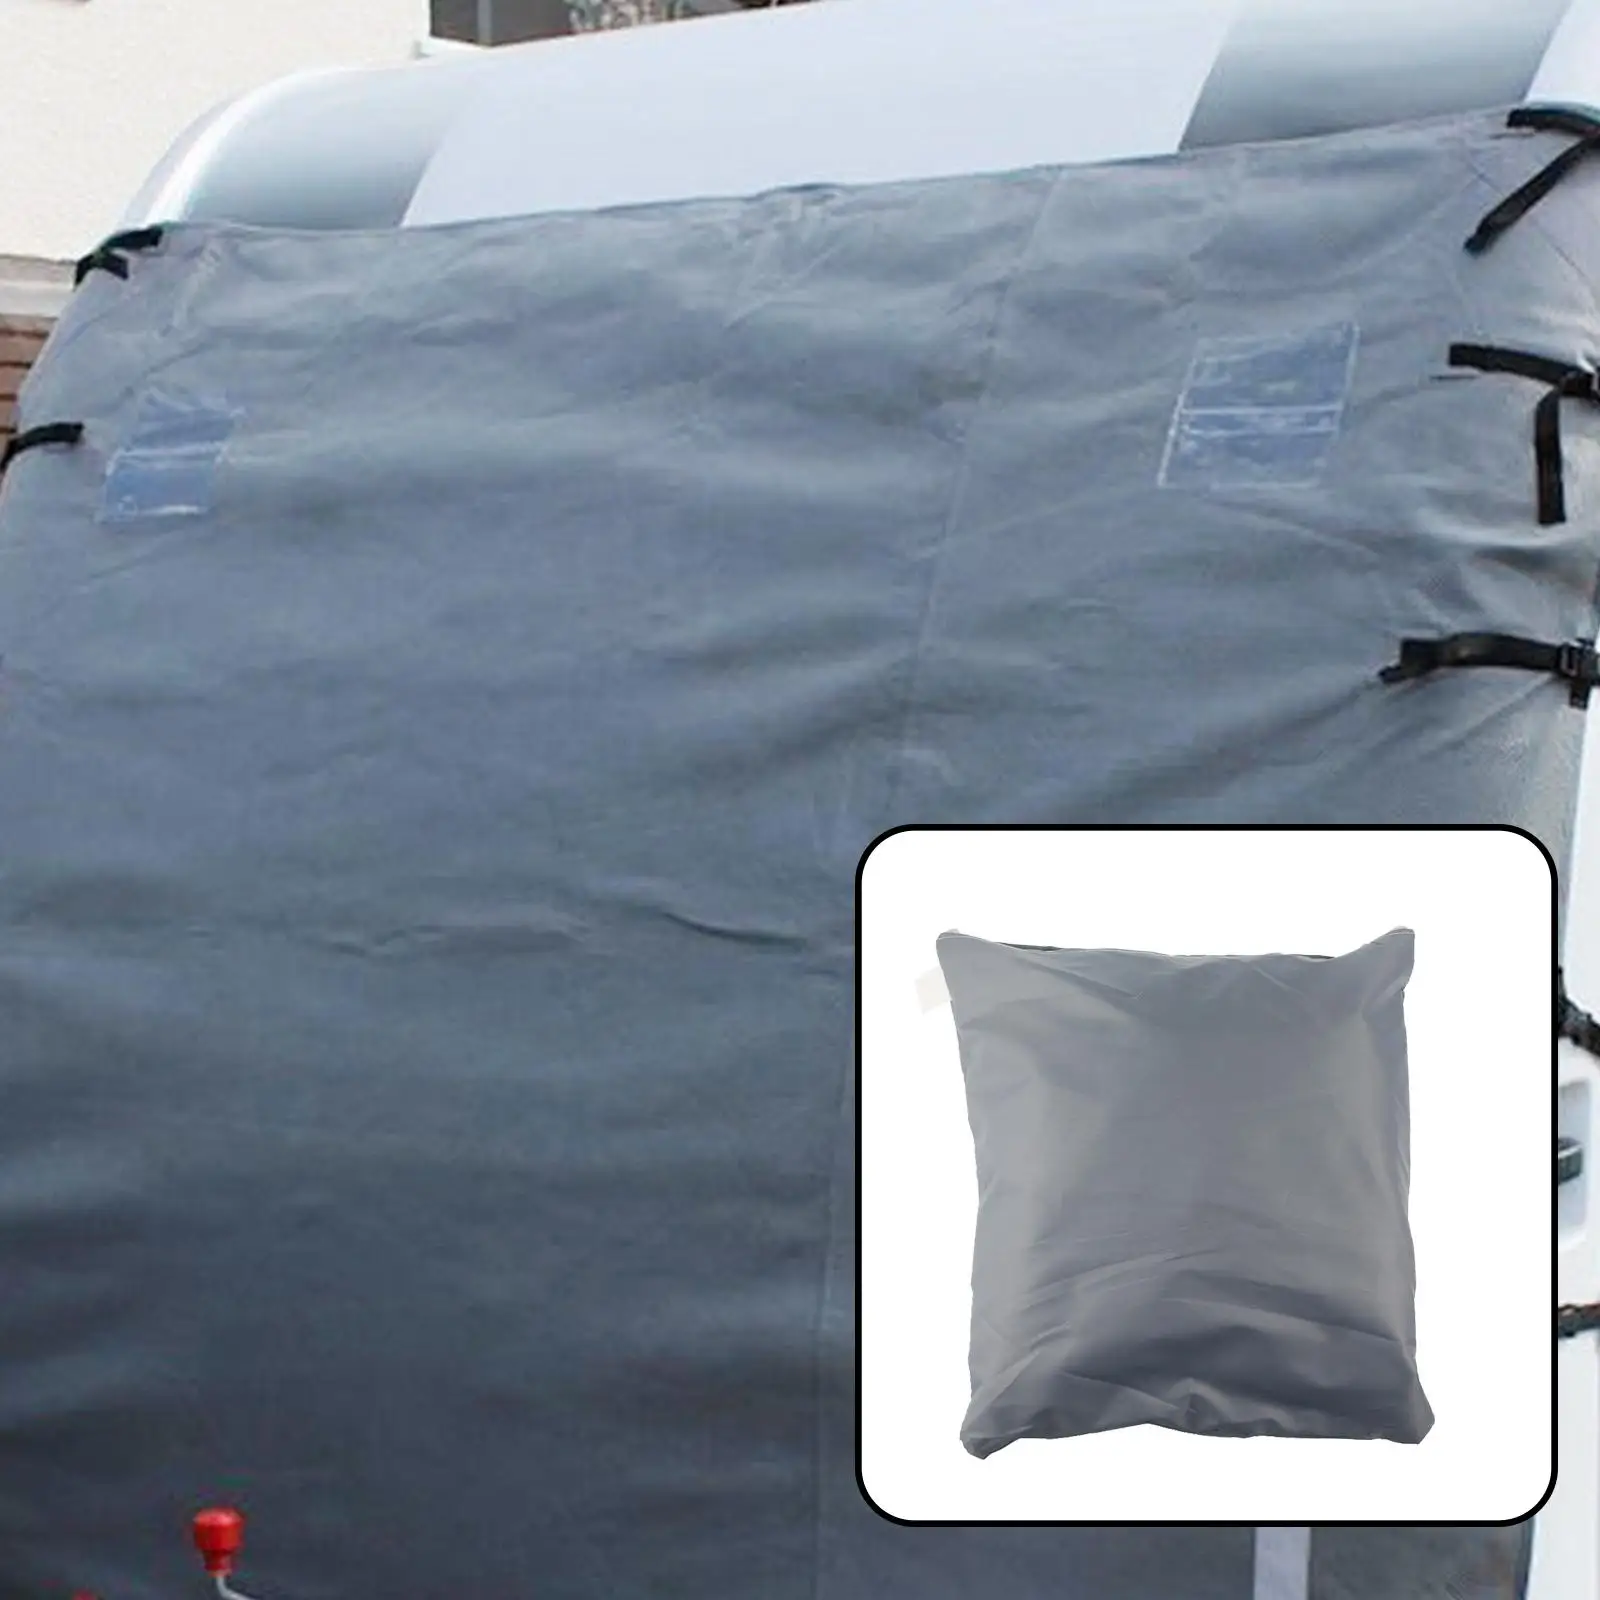 RV Front Towing Cover 4Ply Breathable Oxford Cloth Universal Waterproof Protector with 2 LED Lights Caravan Towing Cover